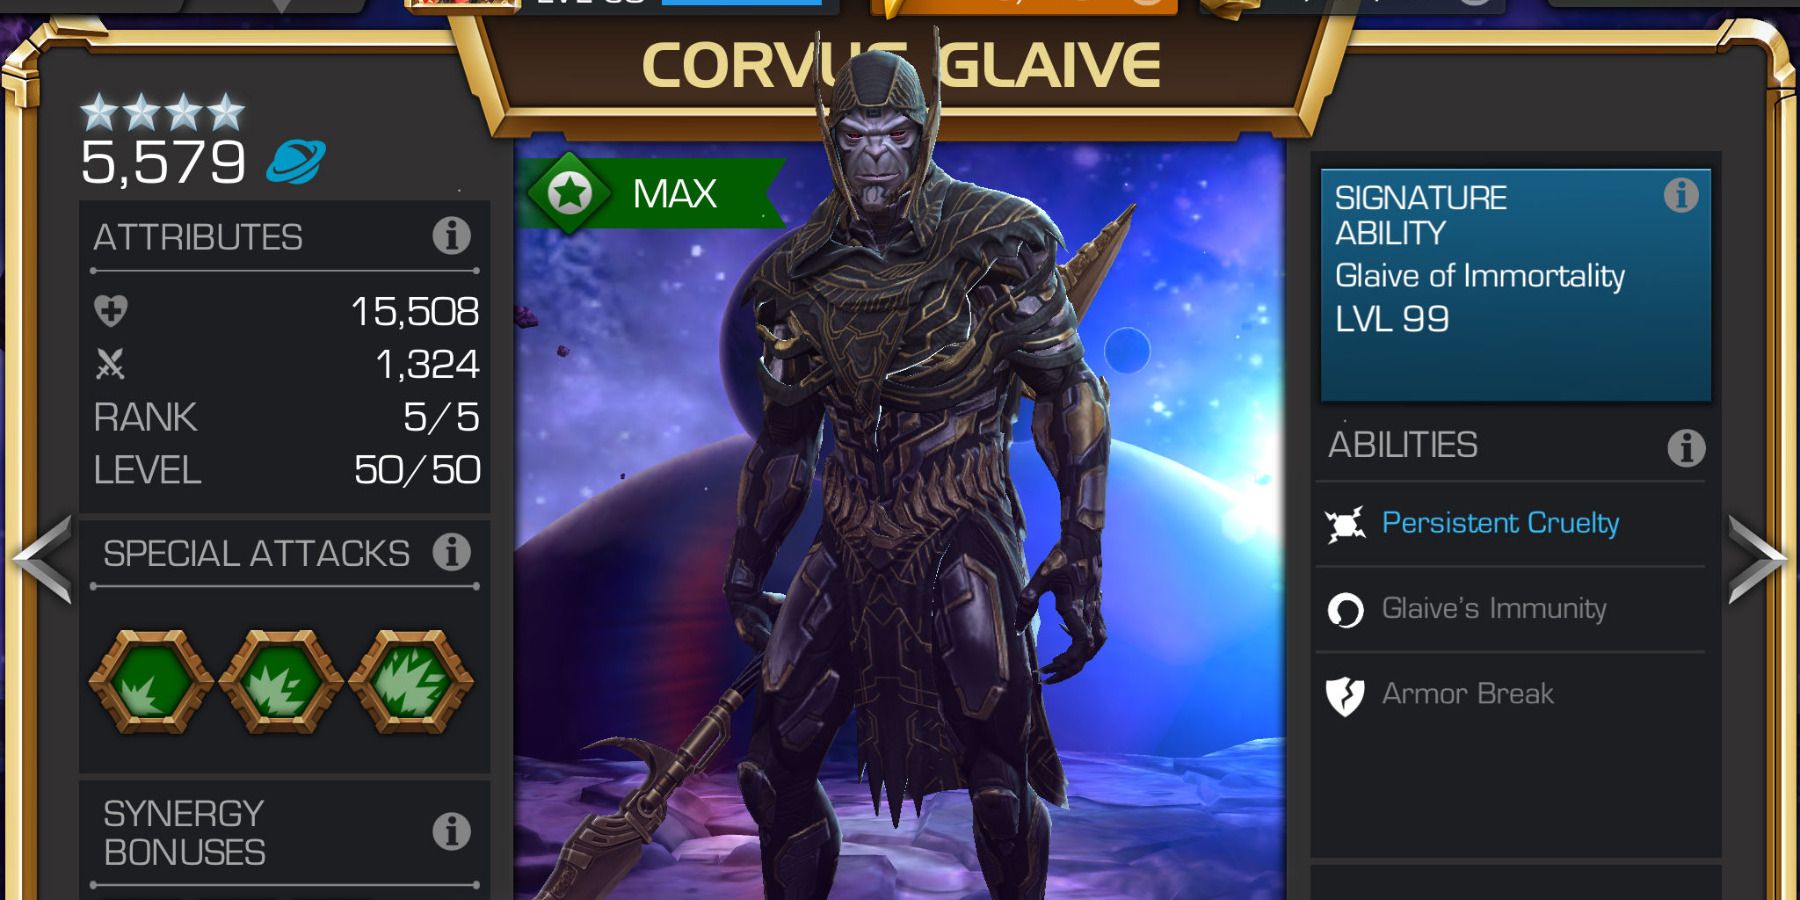 Corvus Glaive in Marvel Contest of Champions.